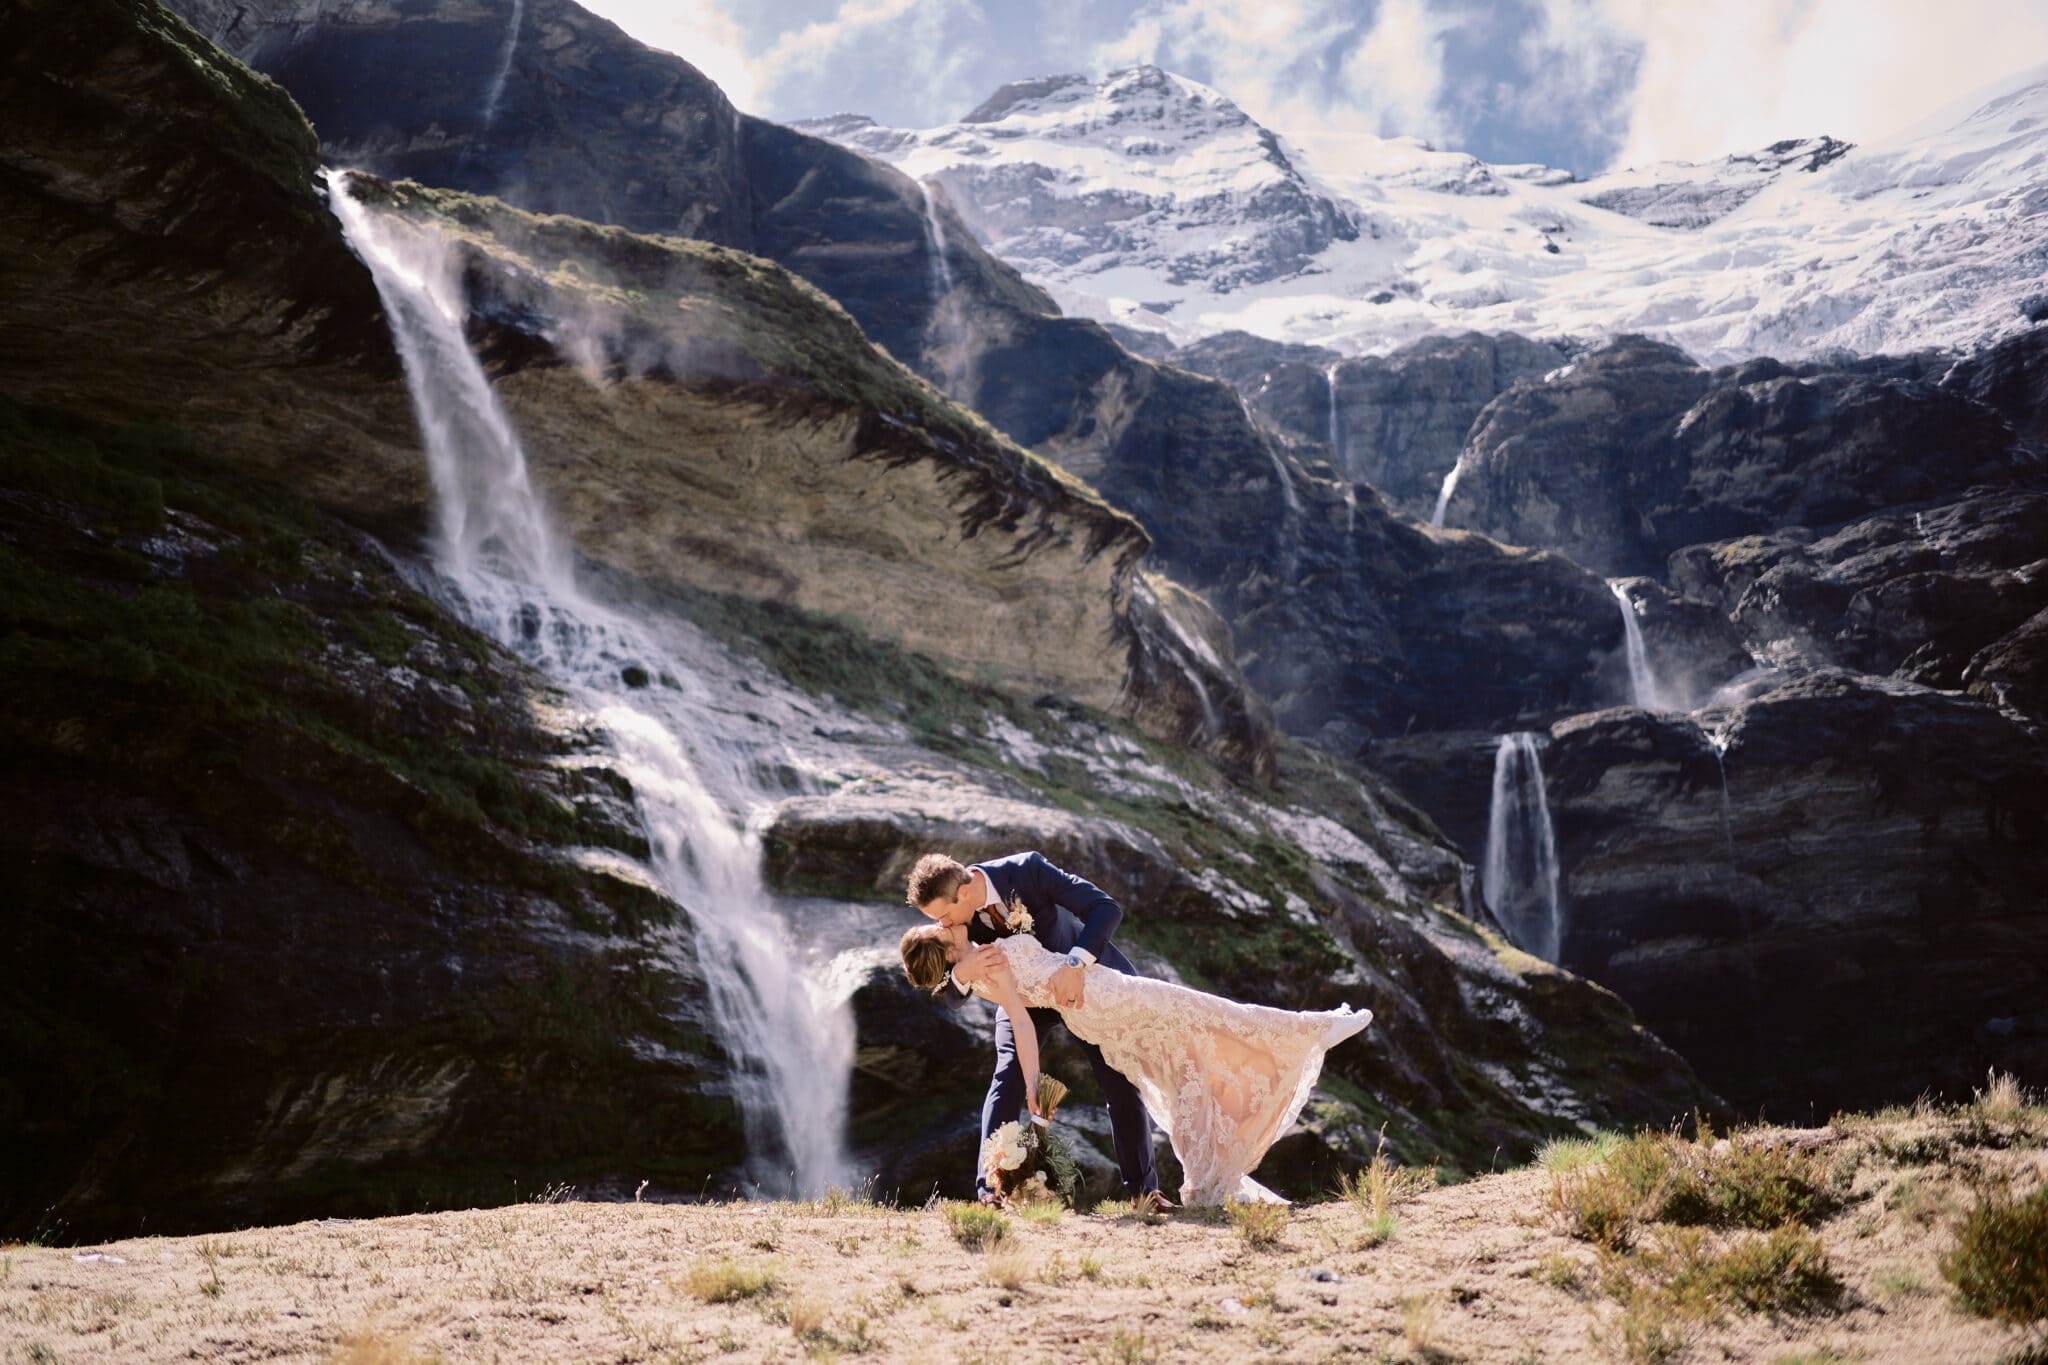 Queenstown New Zealand Elopement Wedding Photographer - A bride and groom sharing an intimate kiss in front of a picturesque waterfall.